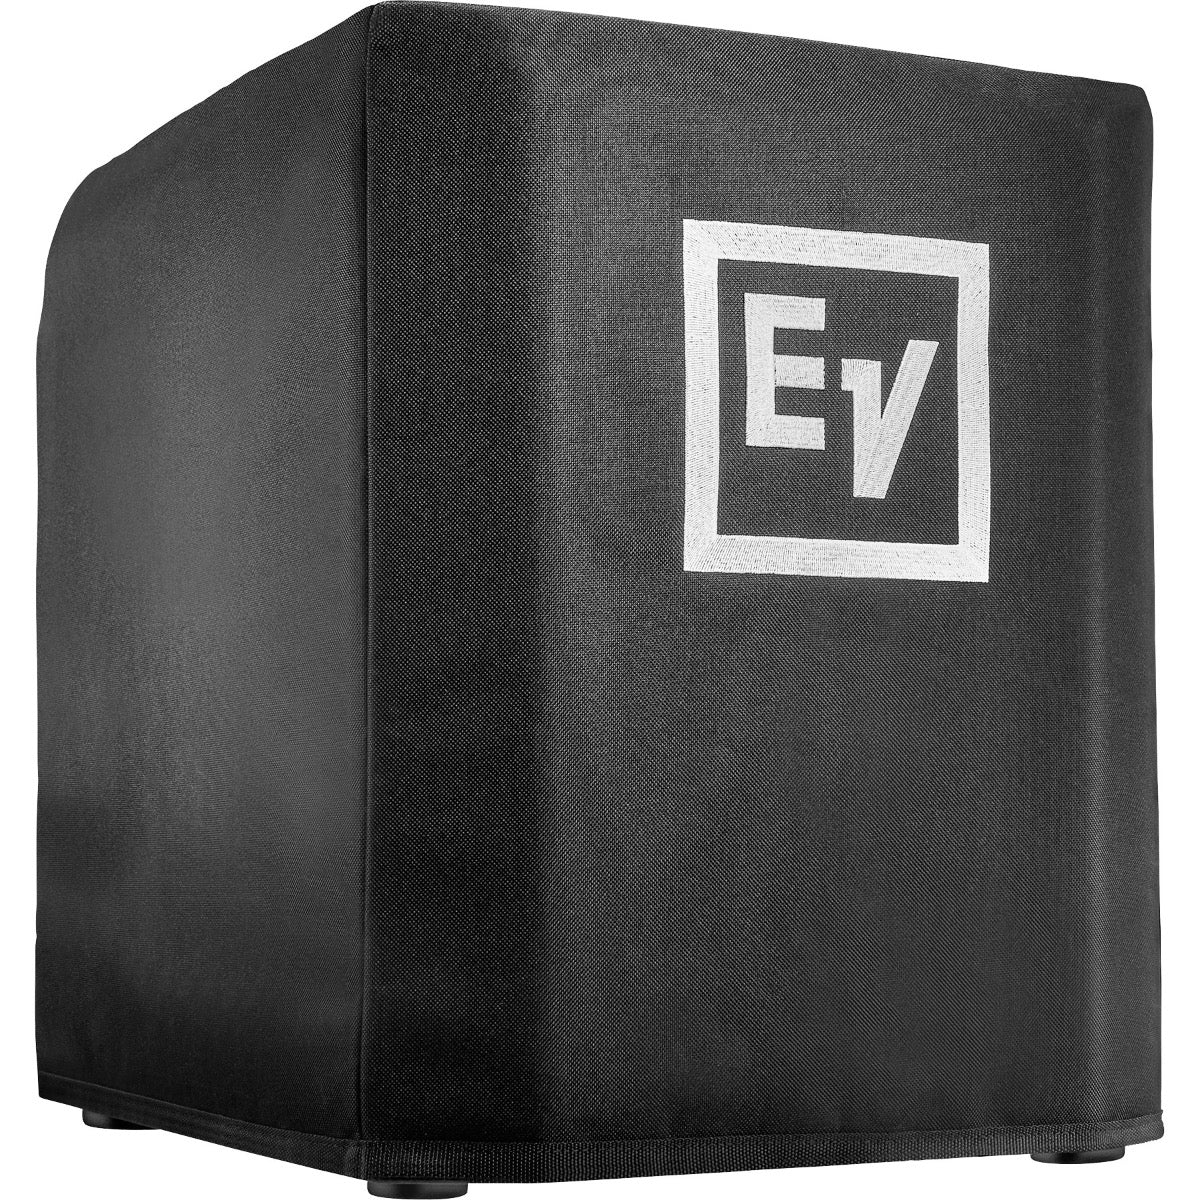 Perspective view of Electro-Voice Evolve 30M Subwoofer Cover showing front and left side